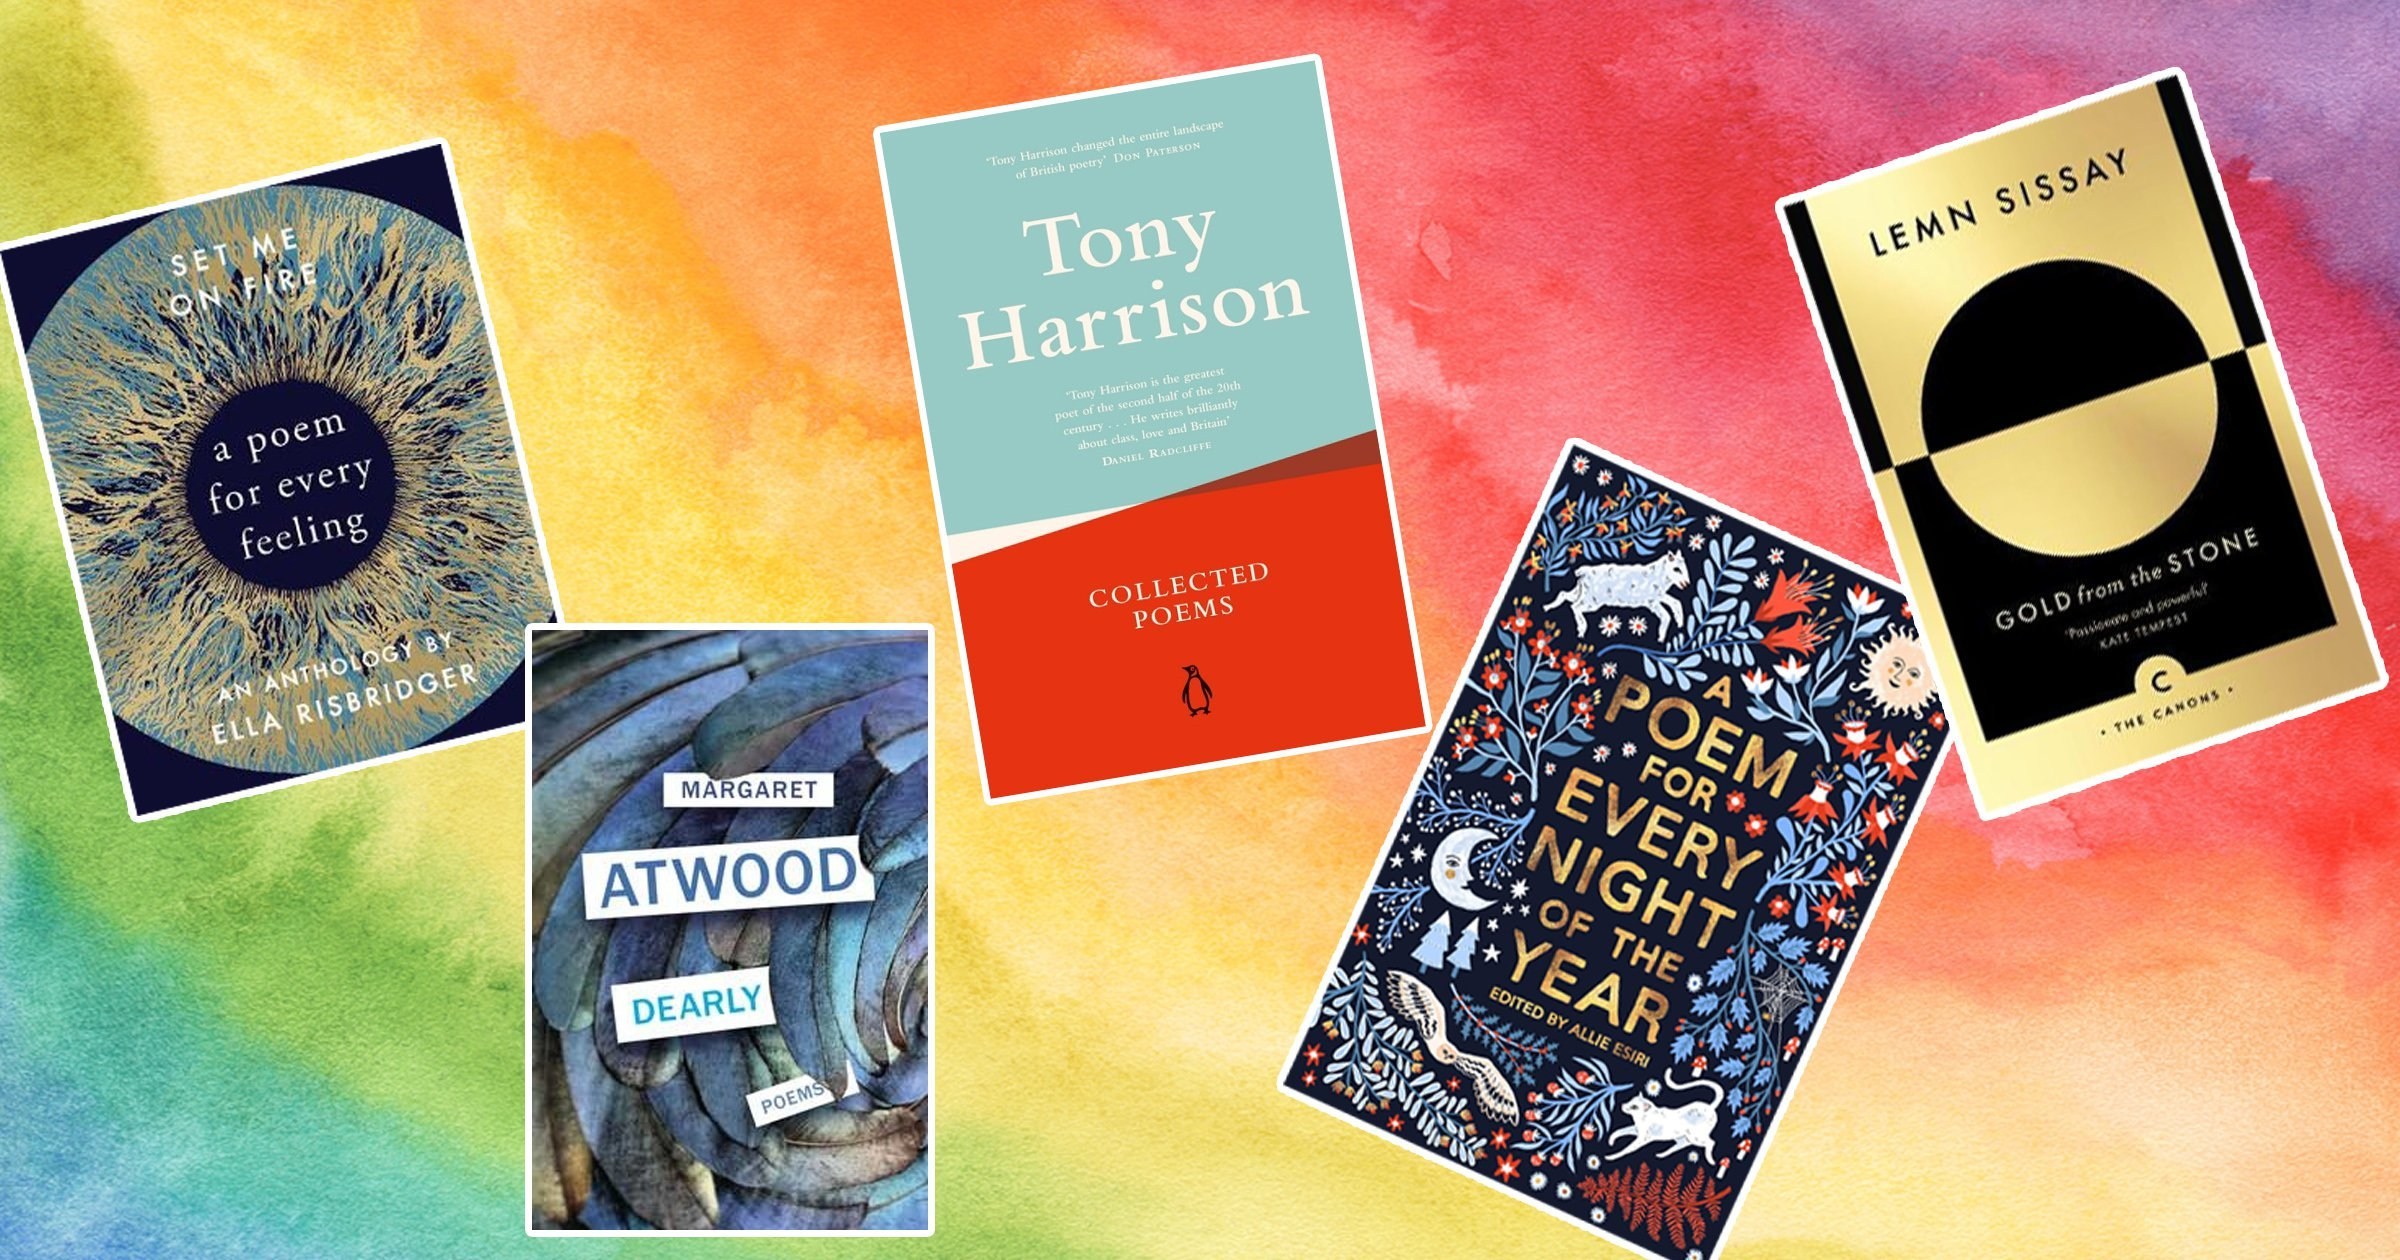 A round-up of poetry books to buy if you want to start reading more